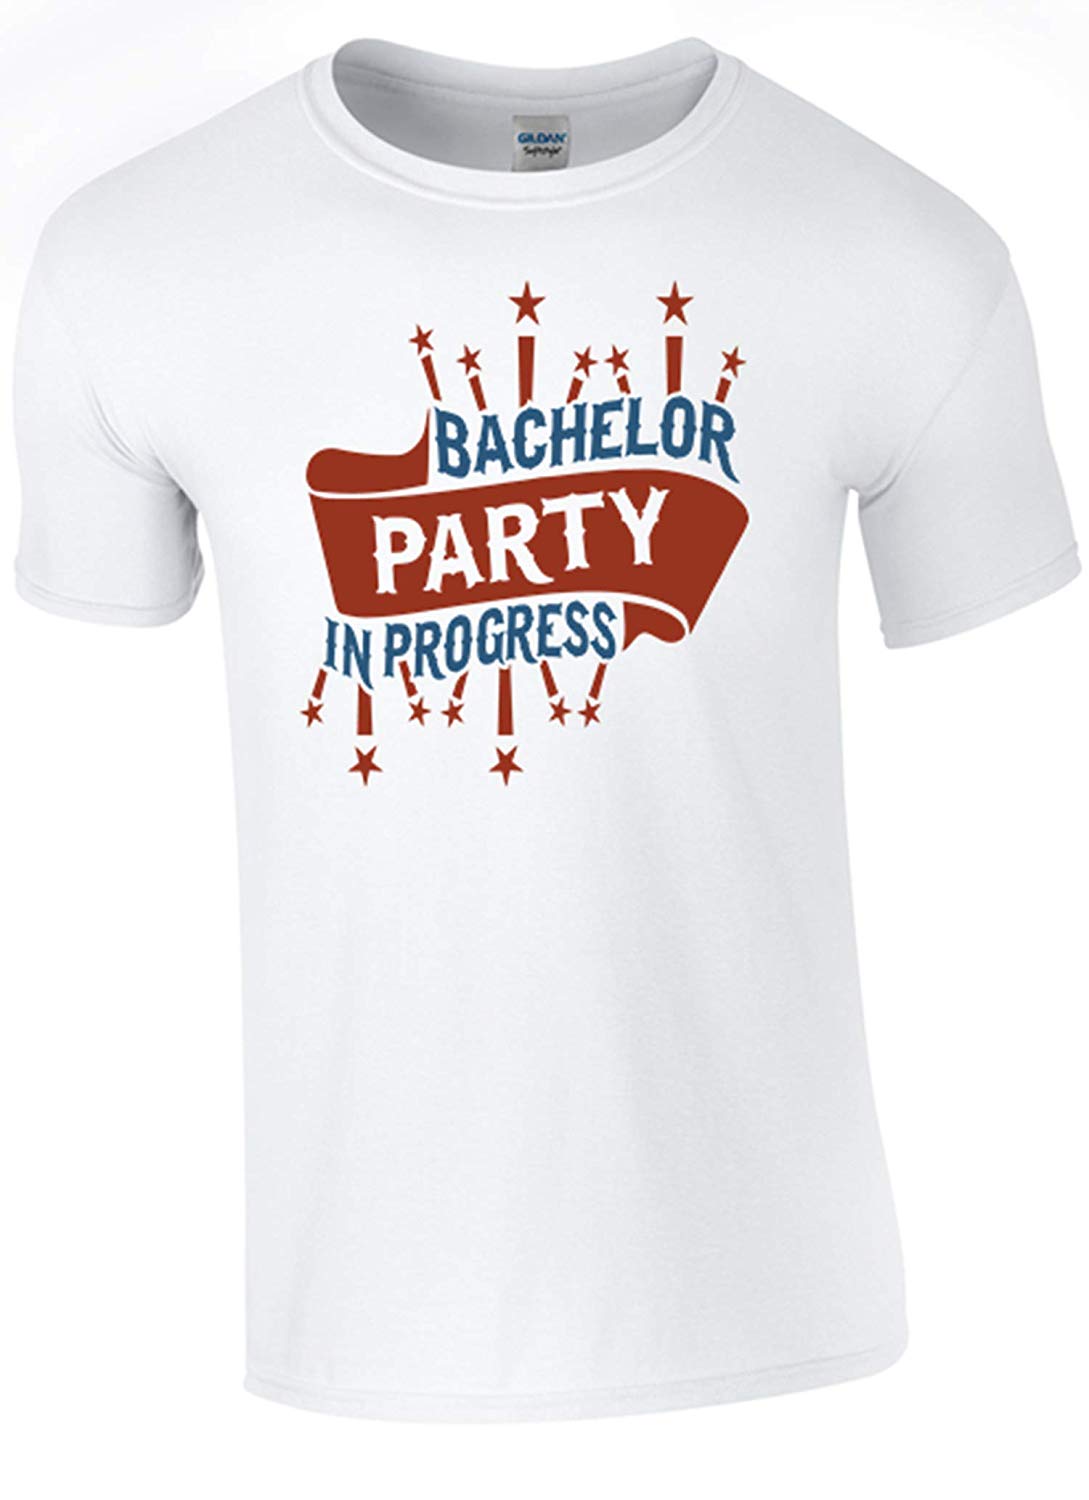 Army 1157 Kit Stag Party - Bachelor Party in Progress T-Shirt Printed DTG (Direct to Garment) for a Permanent Finish - Army 1157 kit M Army 1157 Kit Veterans Owned Business